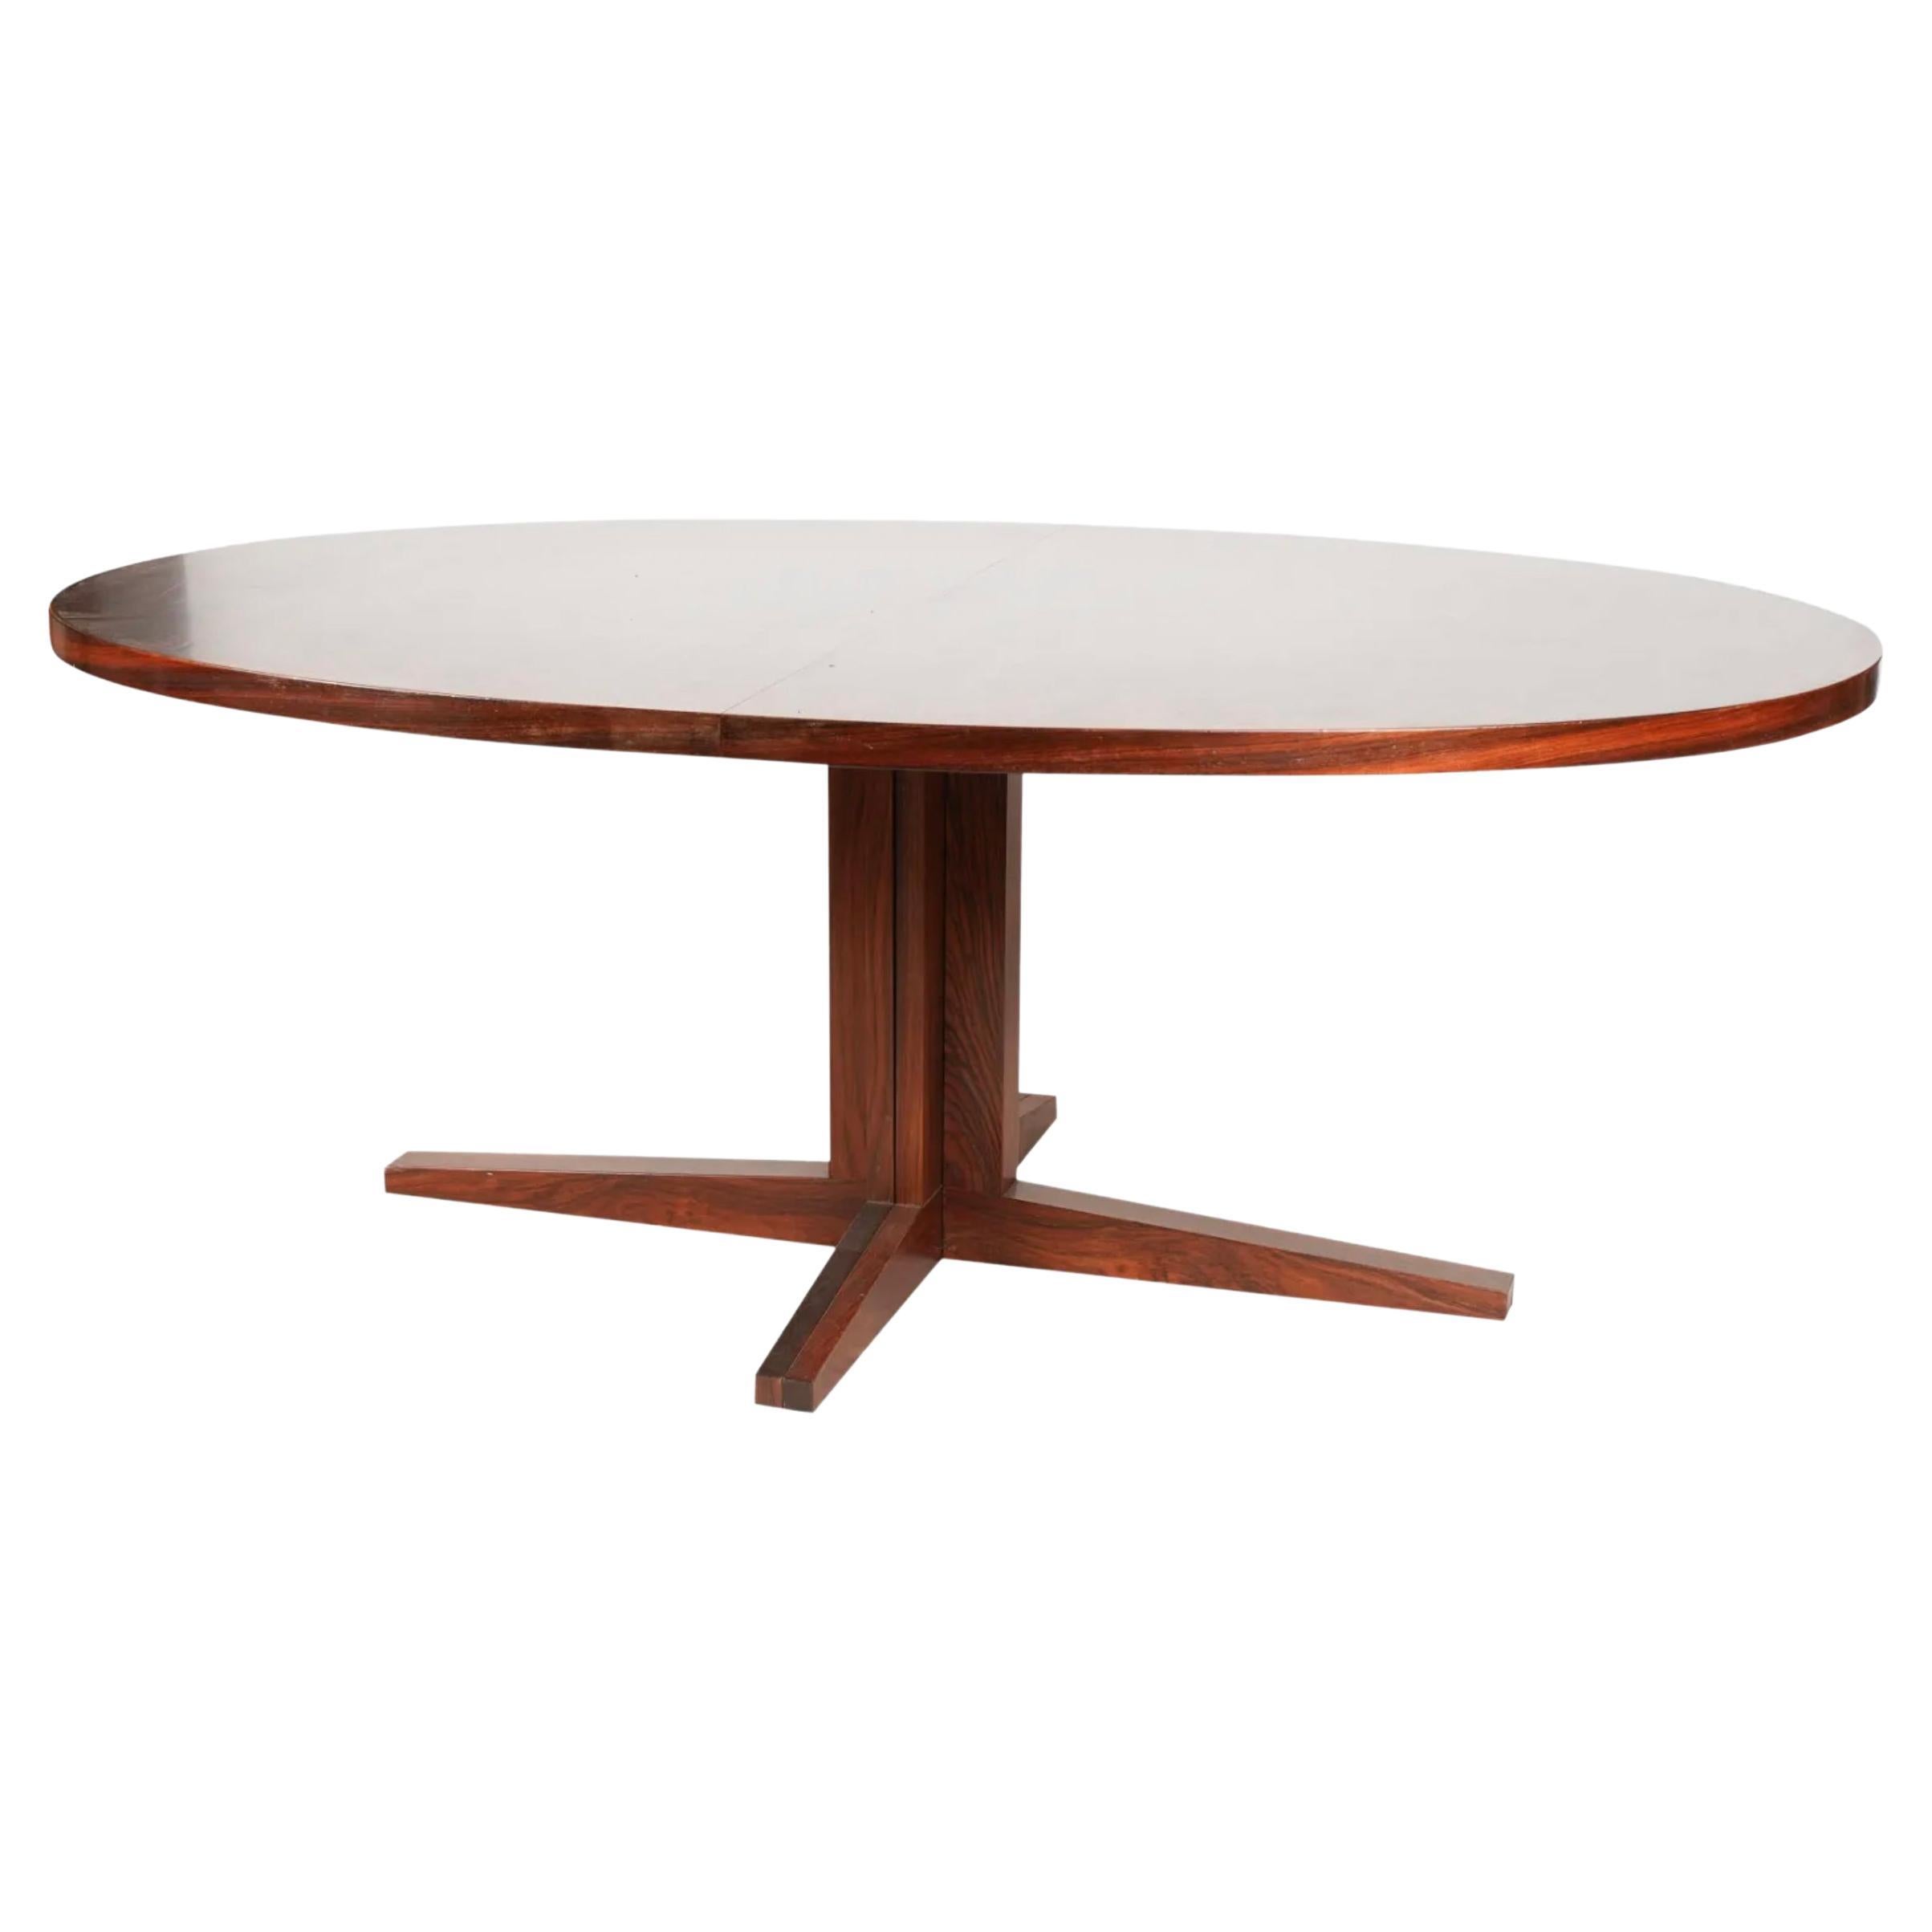 Danish Mid Century Oval Rosewood Dining Table, Circa 1970s at 1stDibs